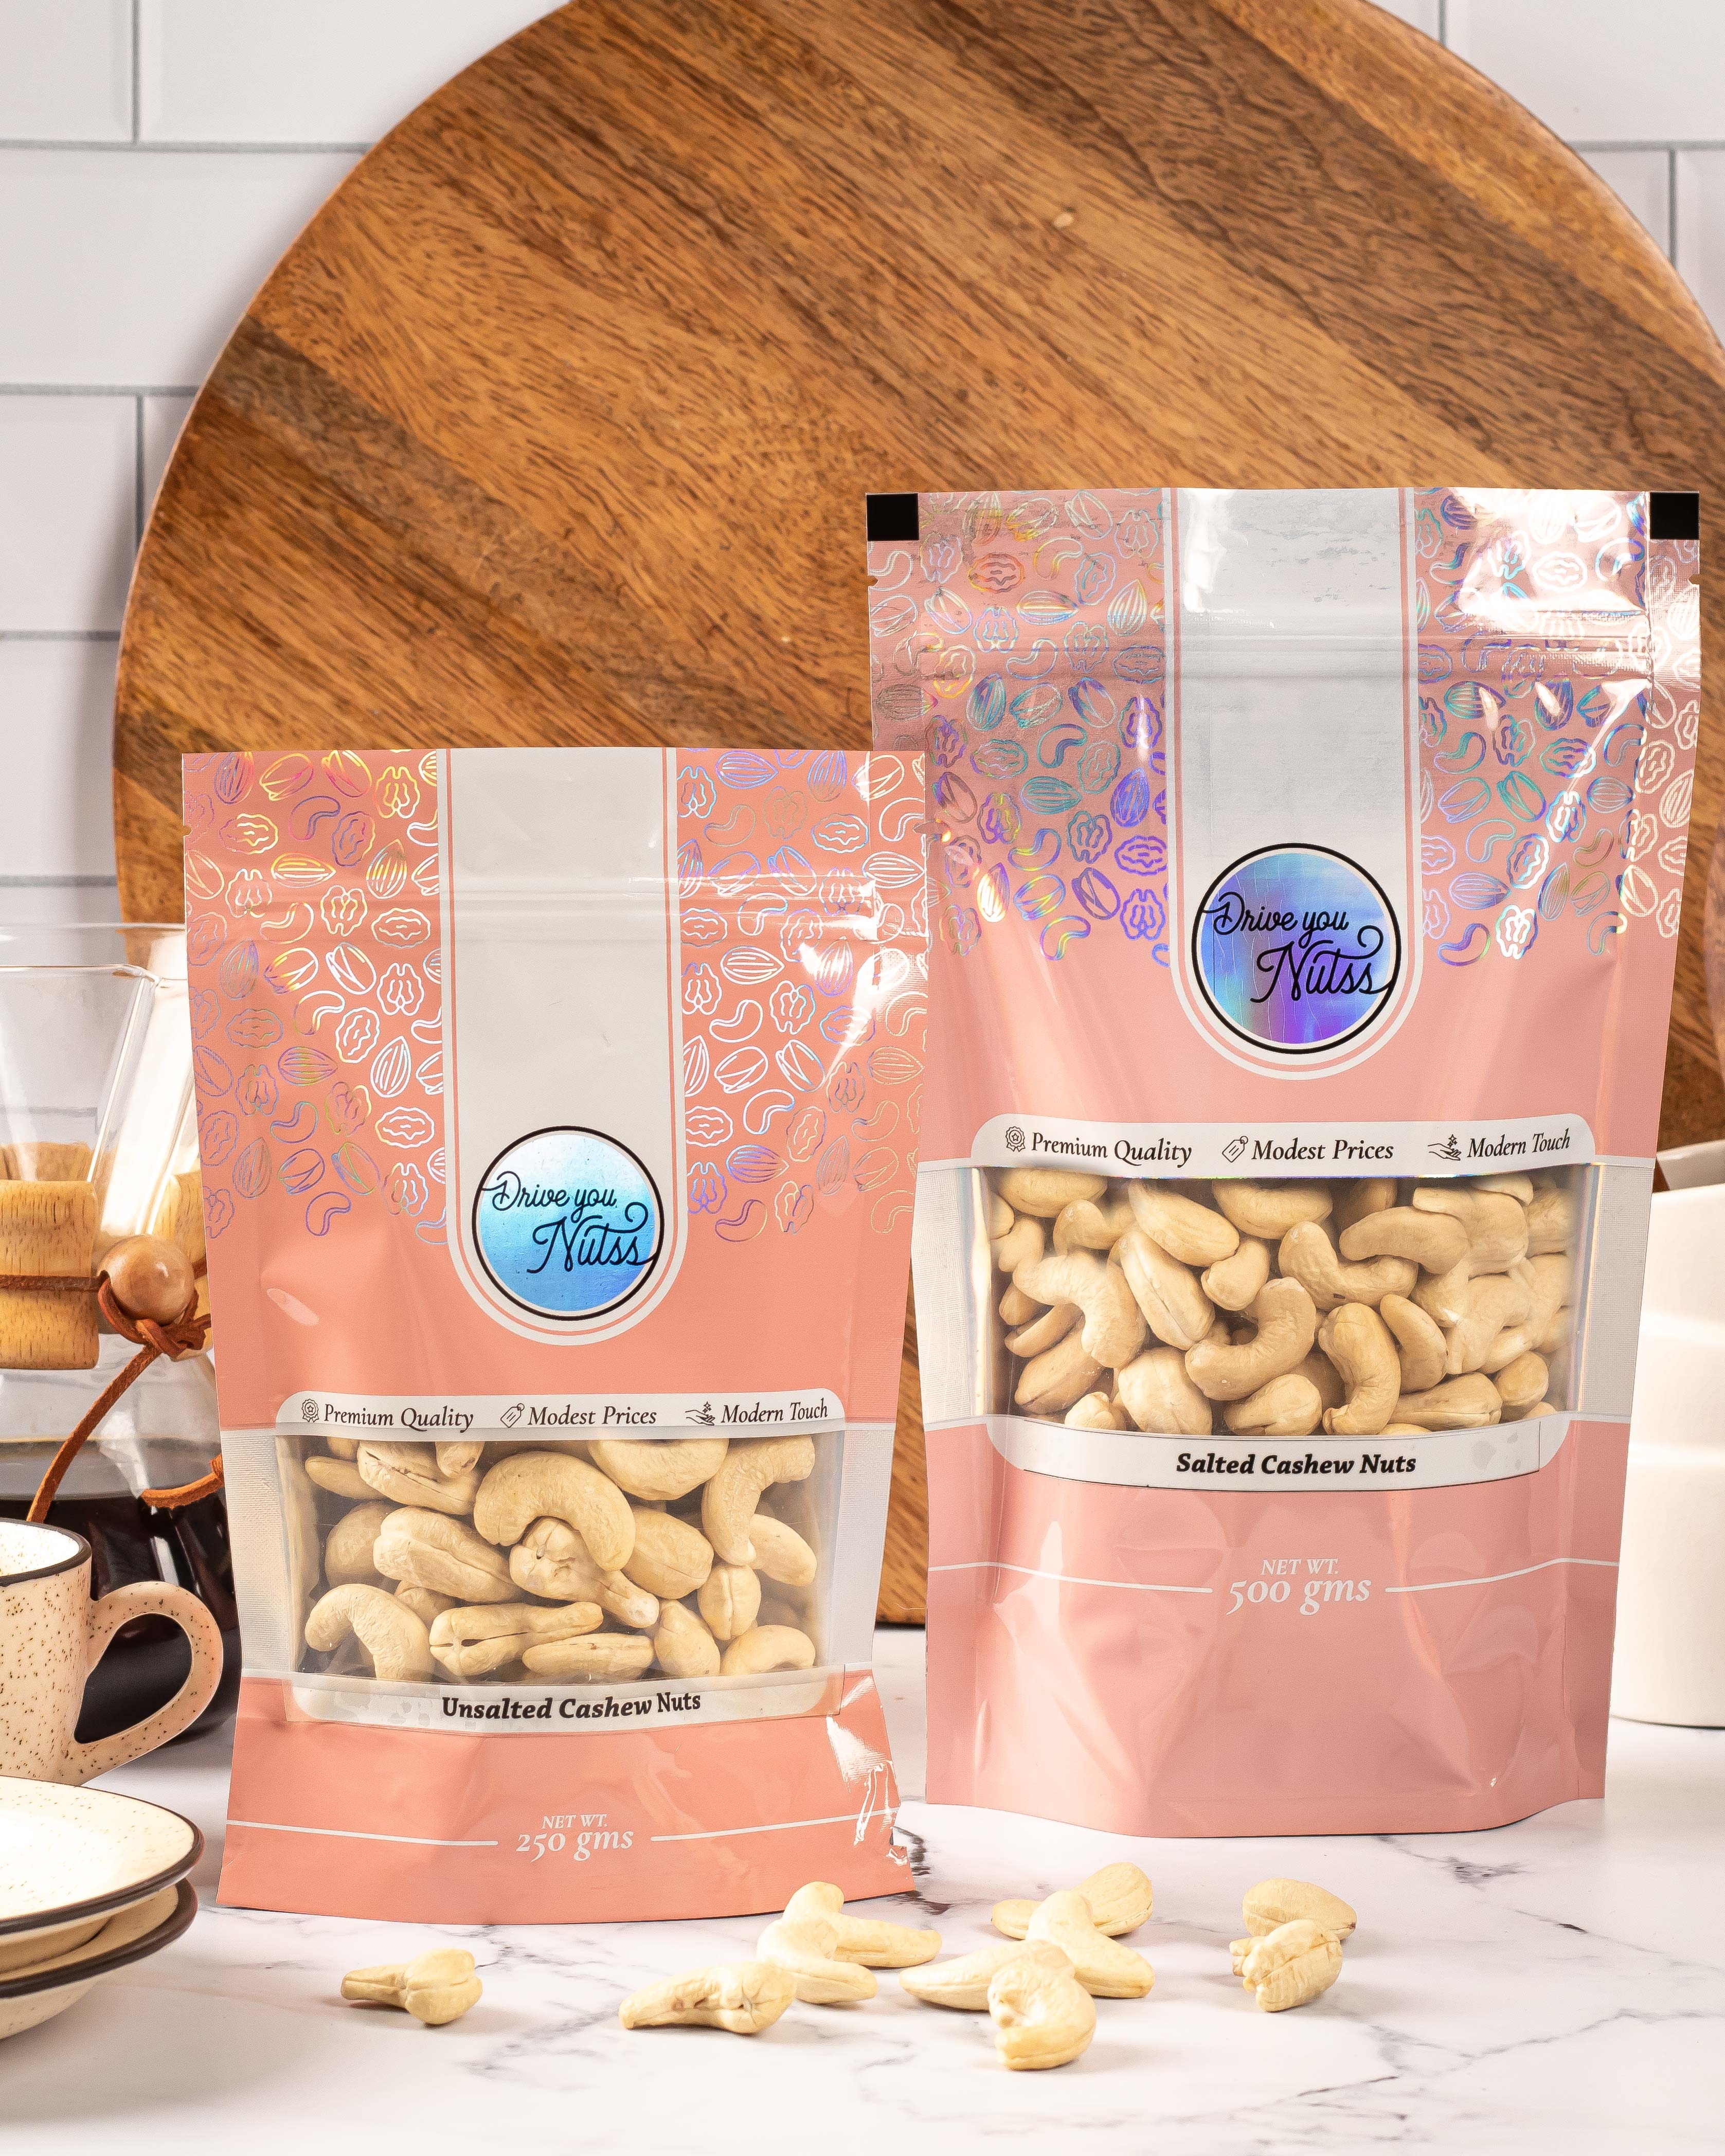 Salted Cashew Nuts (500 Gms)